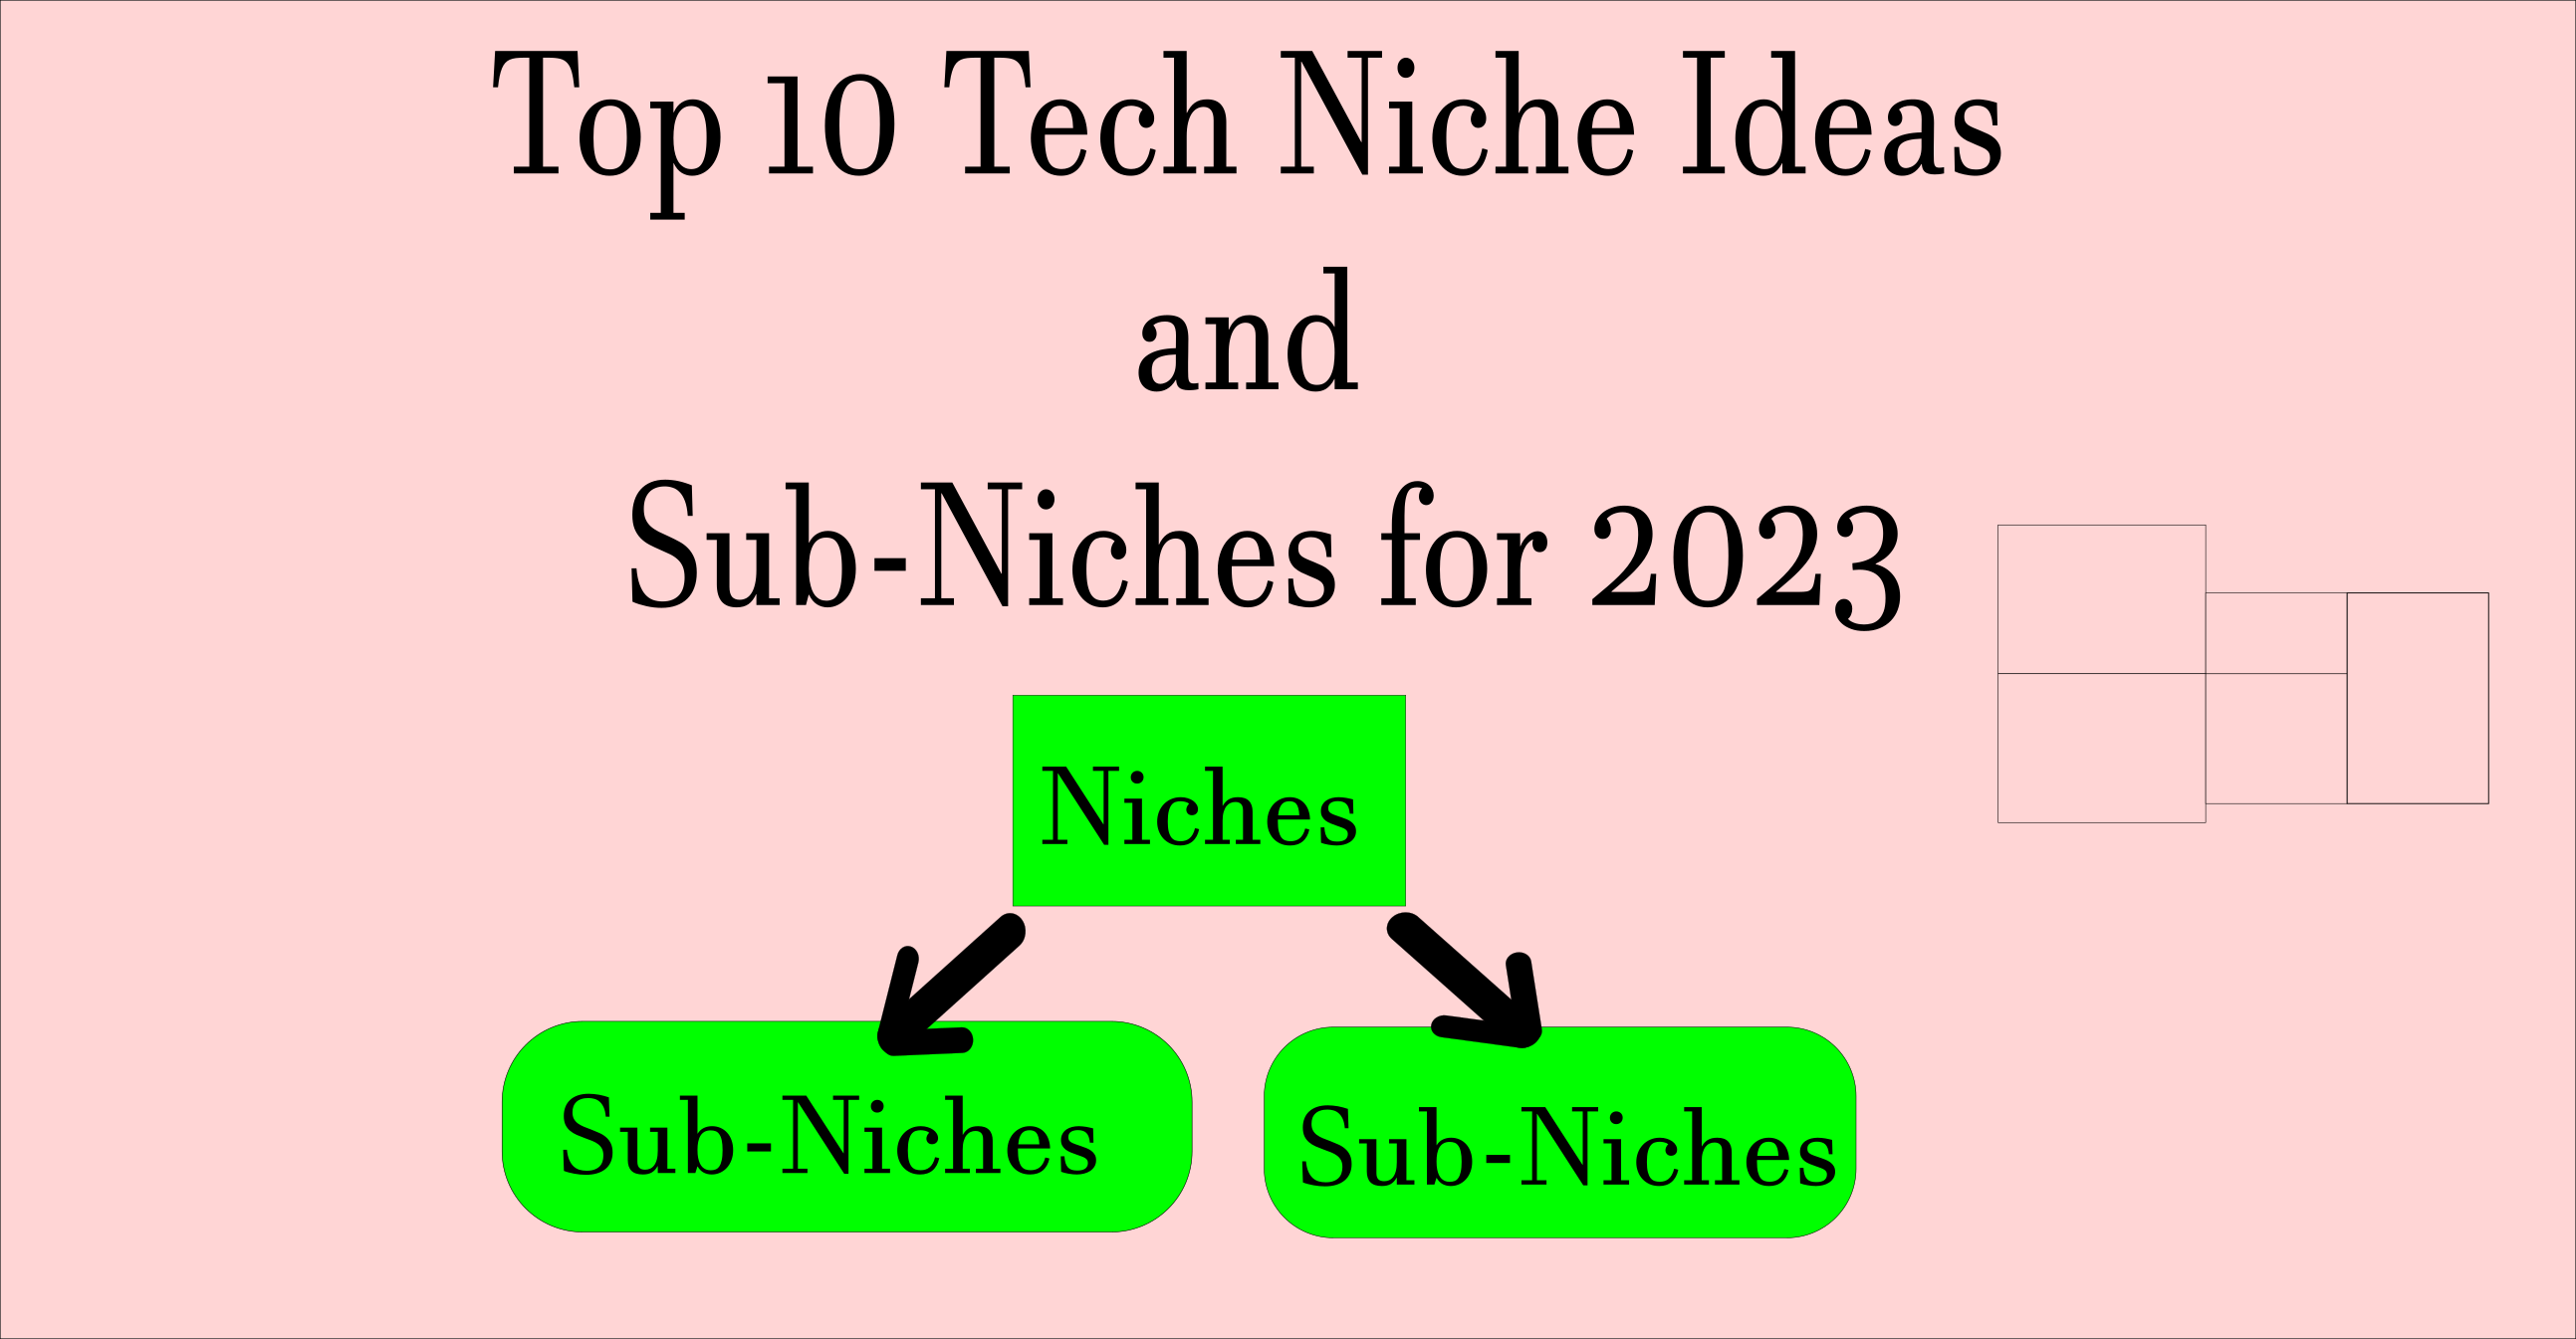 Tech niche, Sub-niches, Tech industry, Emerging technologies, Innovation, Entrepreneurship, Startups, Business ideas, Market trends, Future of technology, Artificial intelligence, Internet of Things, Cybersecurity, Cloud computing, Data analytics.